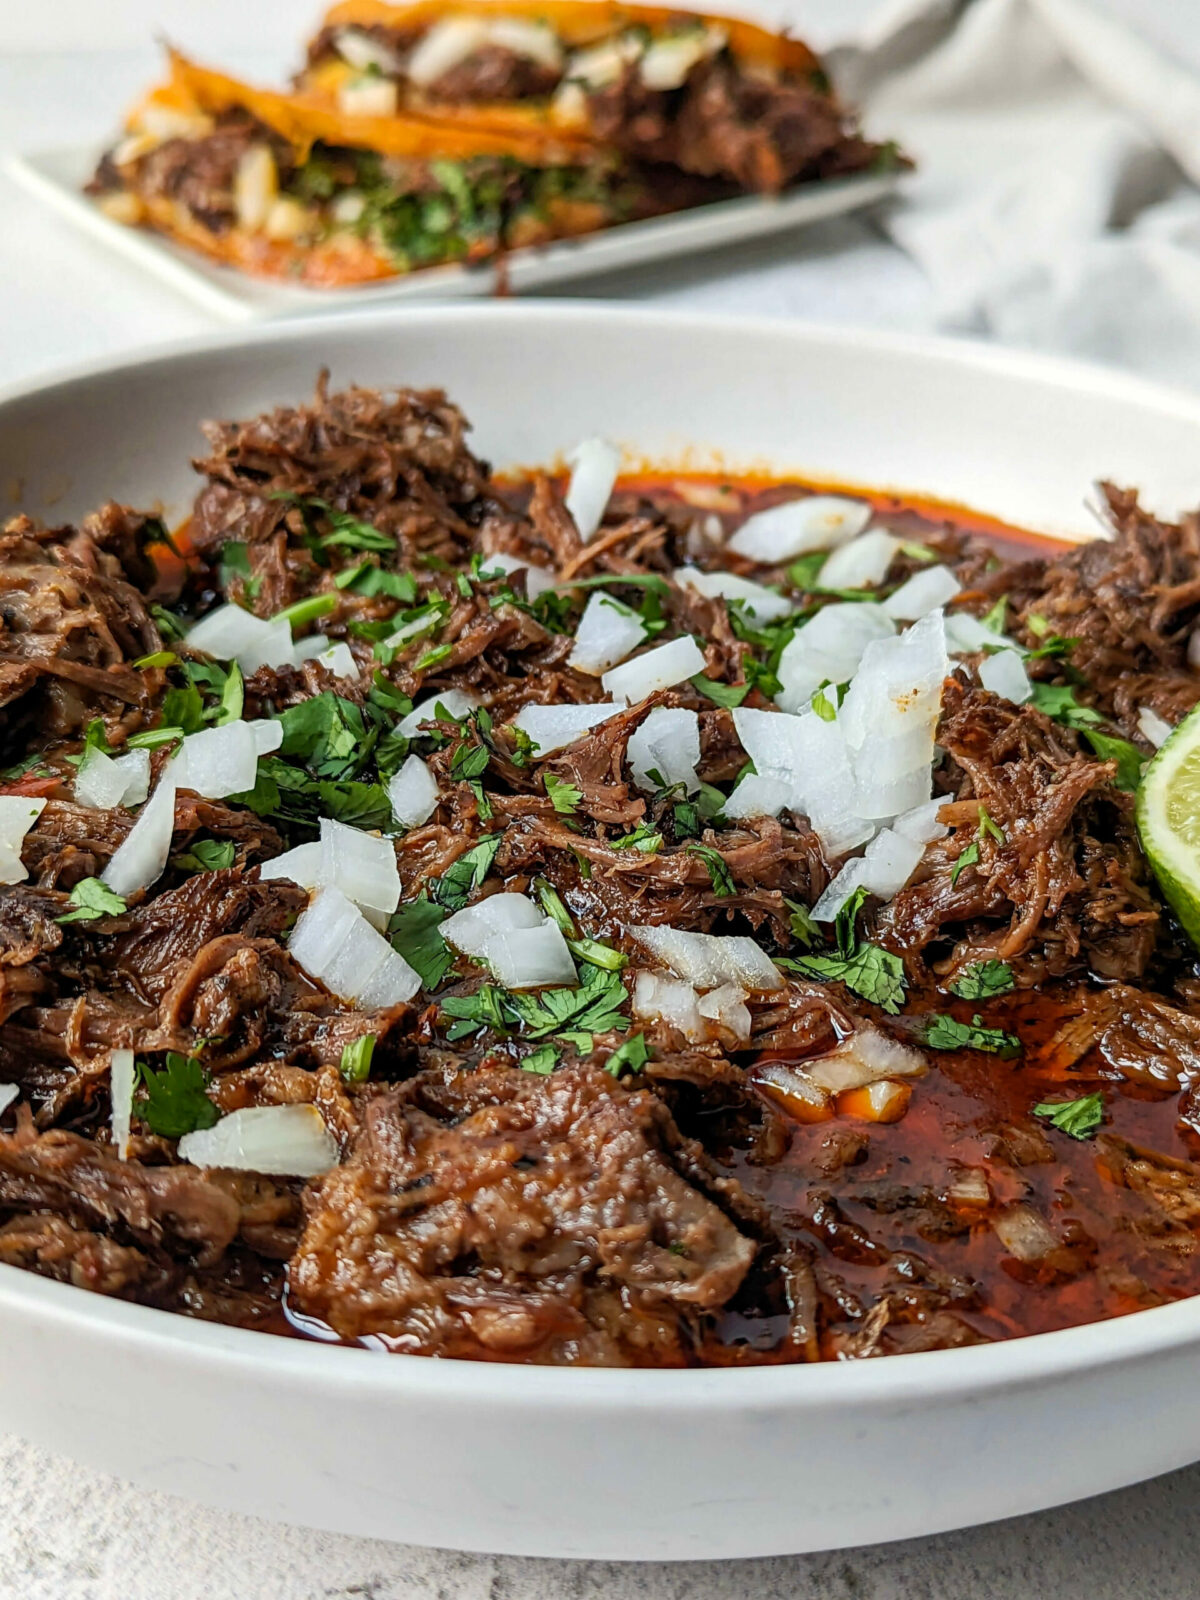 A bowl of birria con consome garnished with onion and cilantro with birria tacos in the background.